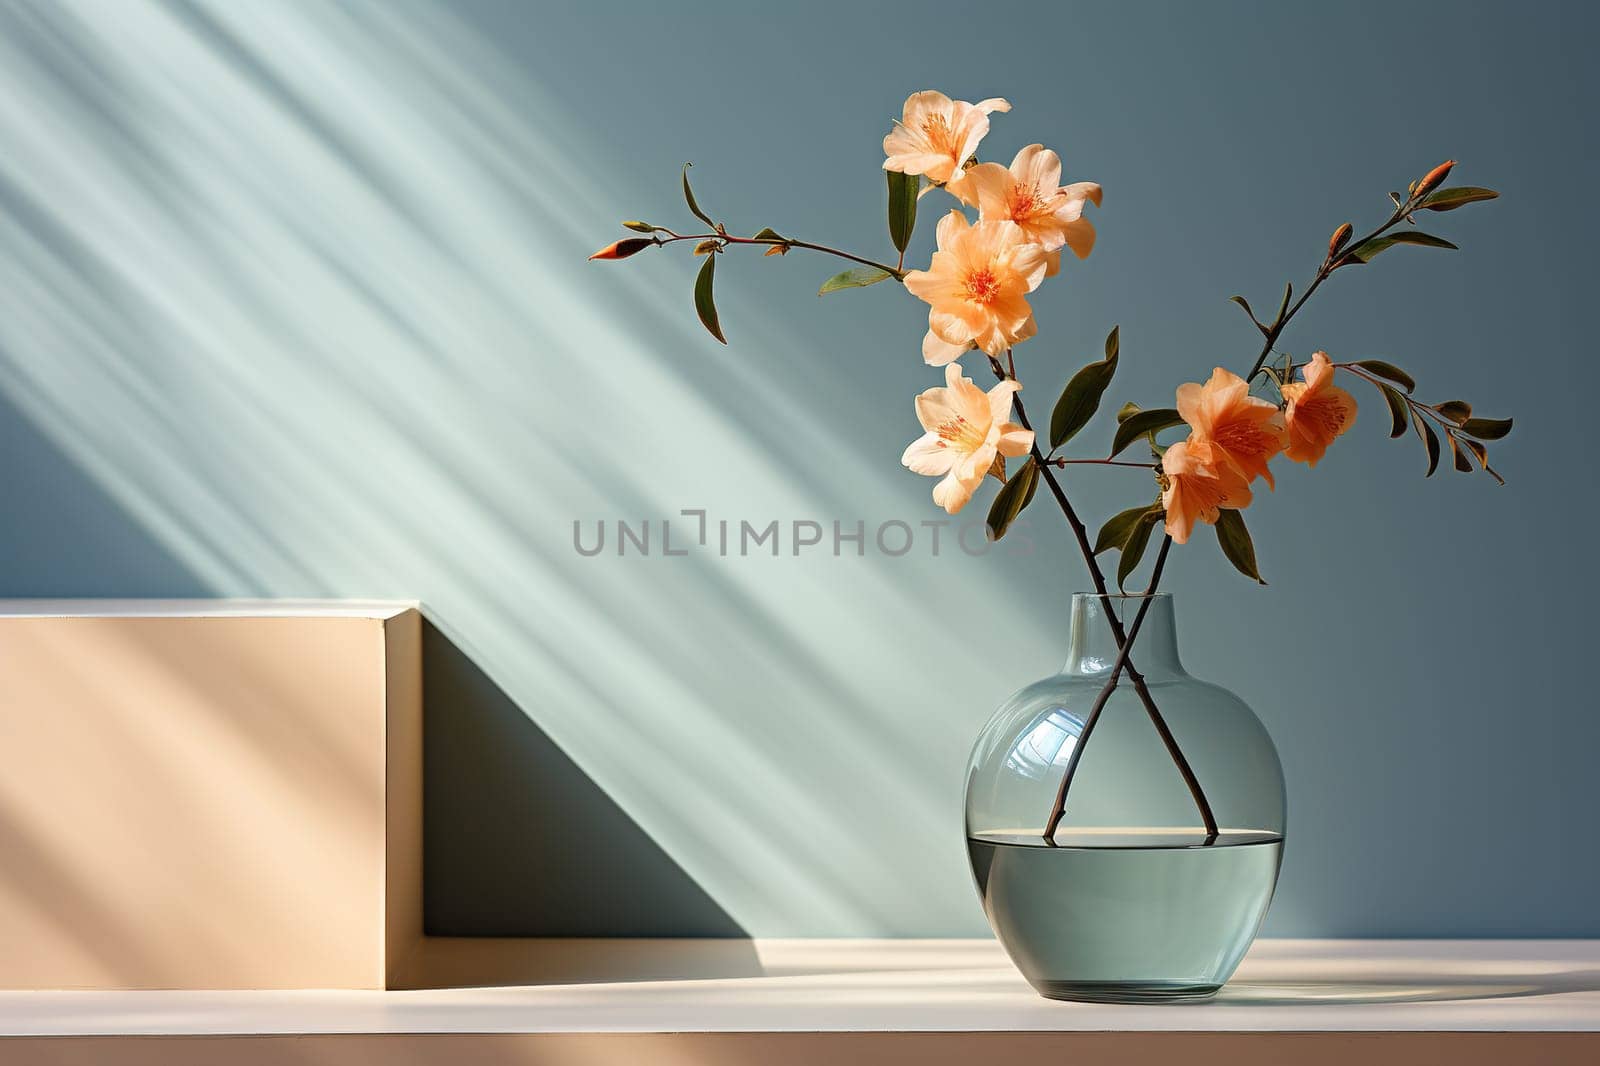 Glass vase with flowers on the table, minimalism. Shadows on the wall. Generated by artificial intelligence by Vovmar